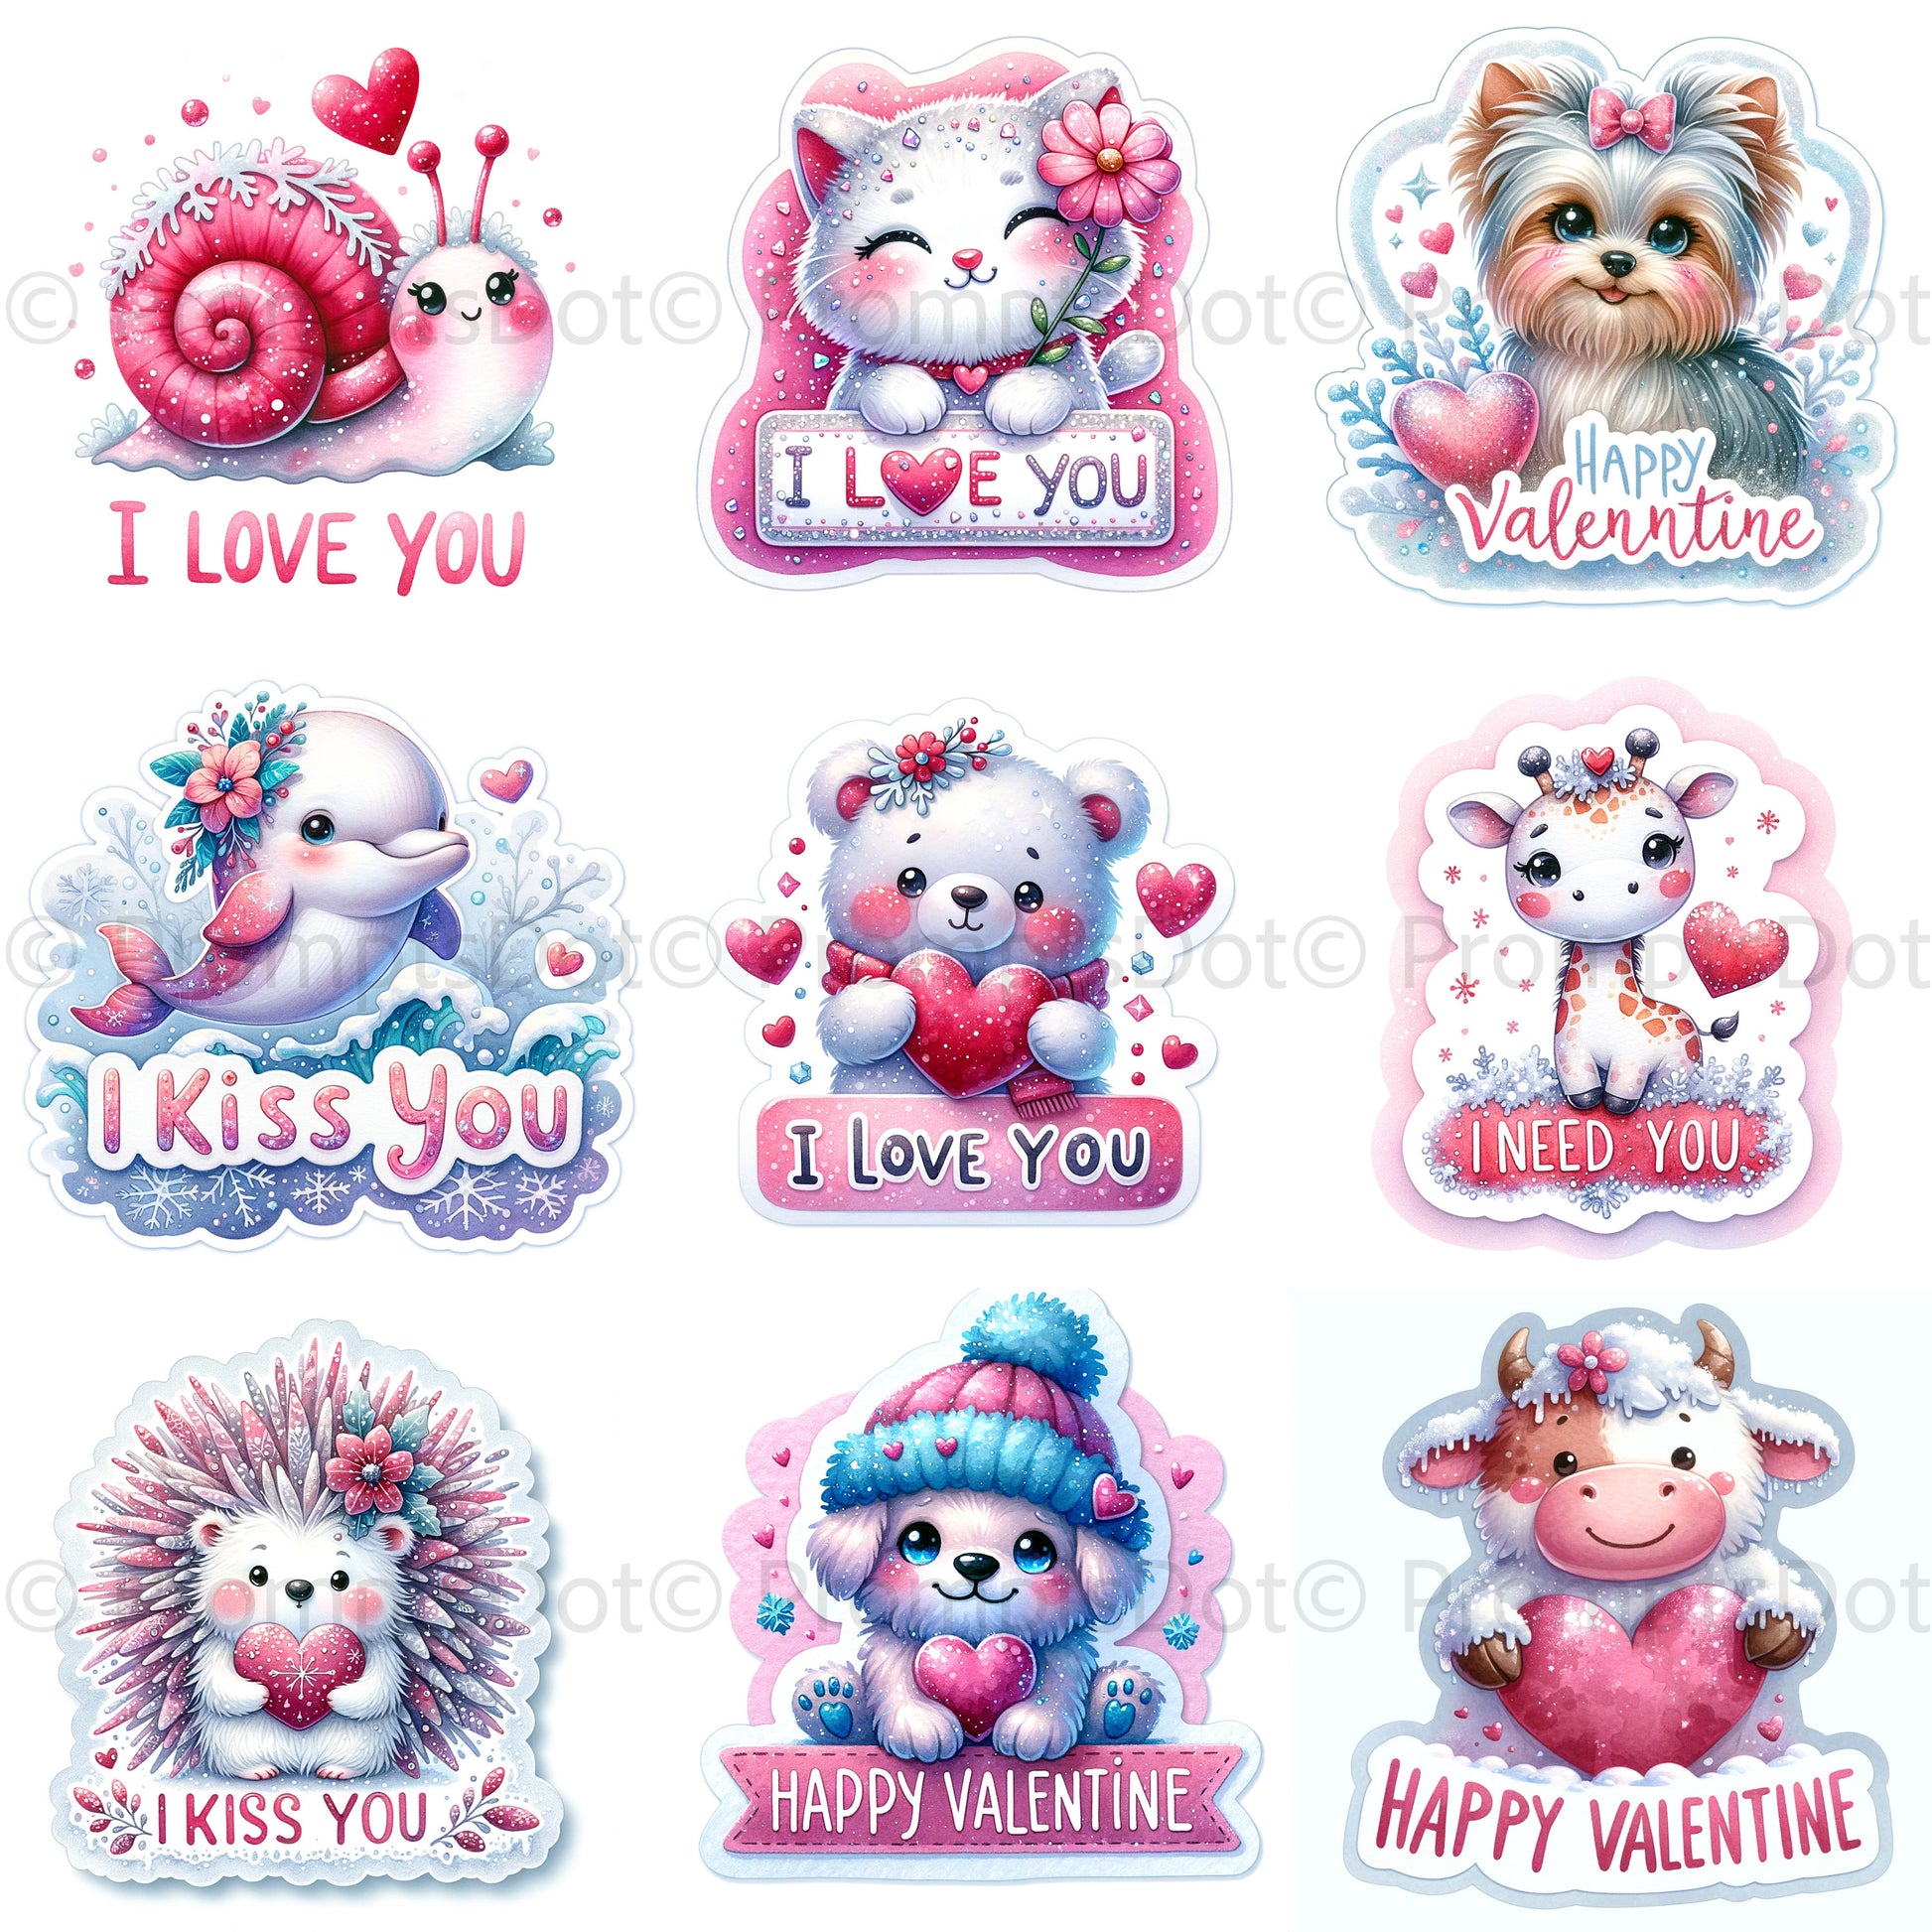 Cute Valentines Illustrations With Text DALLE3 DALLE Prompt